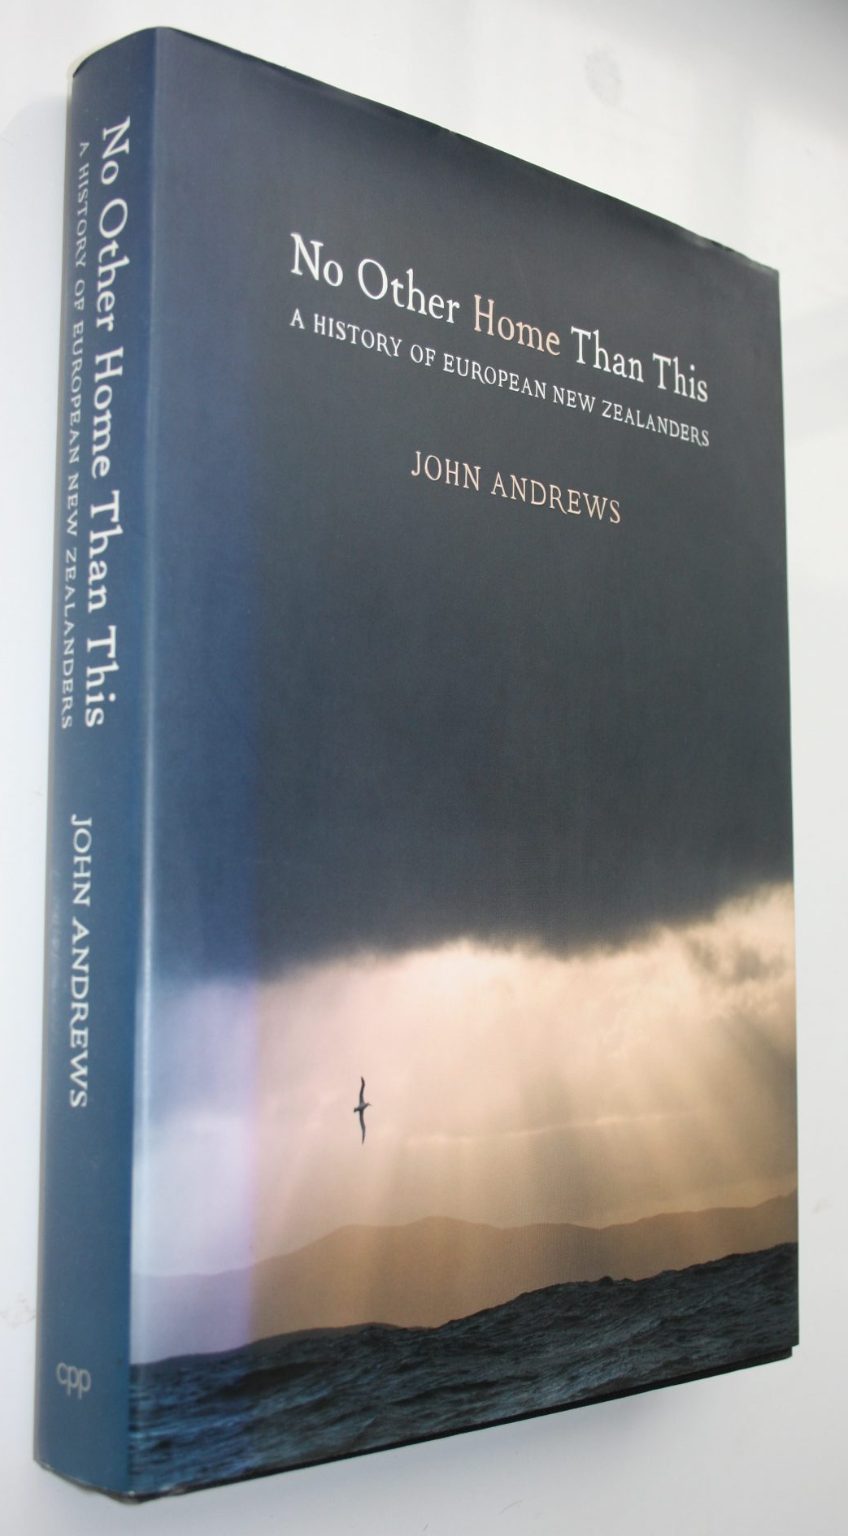 No Other Home Than This. A History of European New Zealanders. By John Andrews.